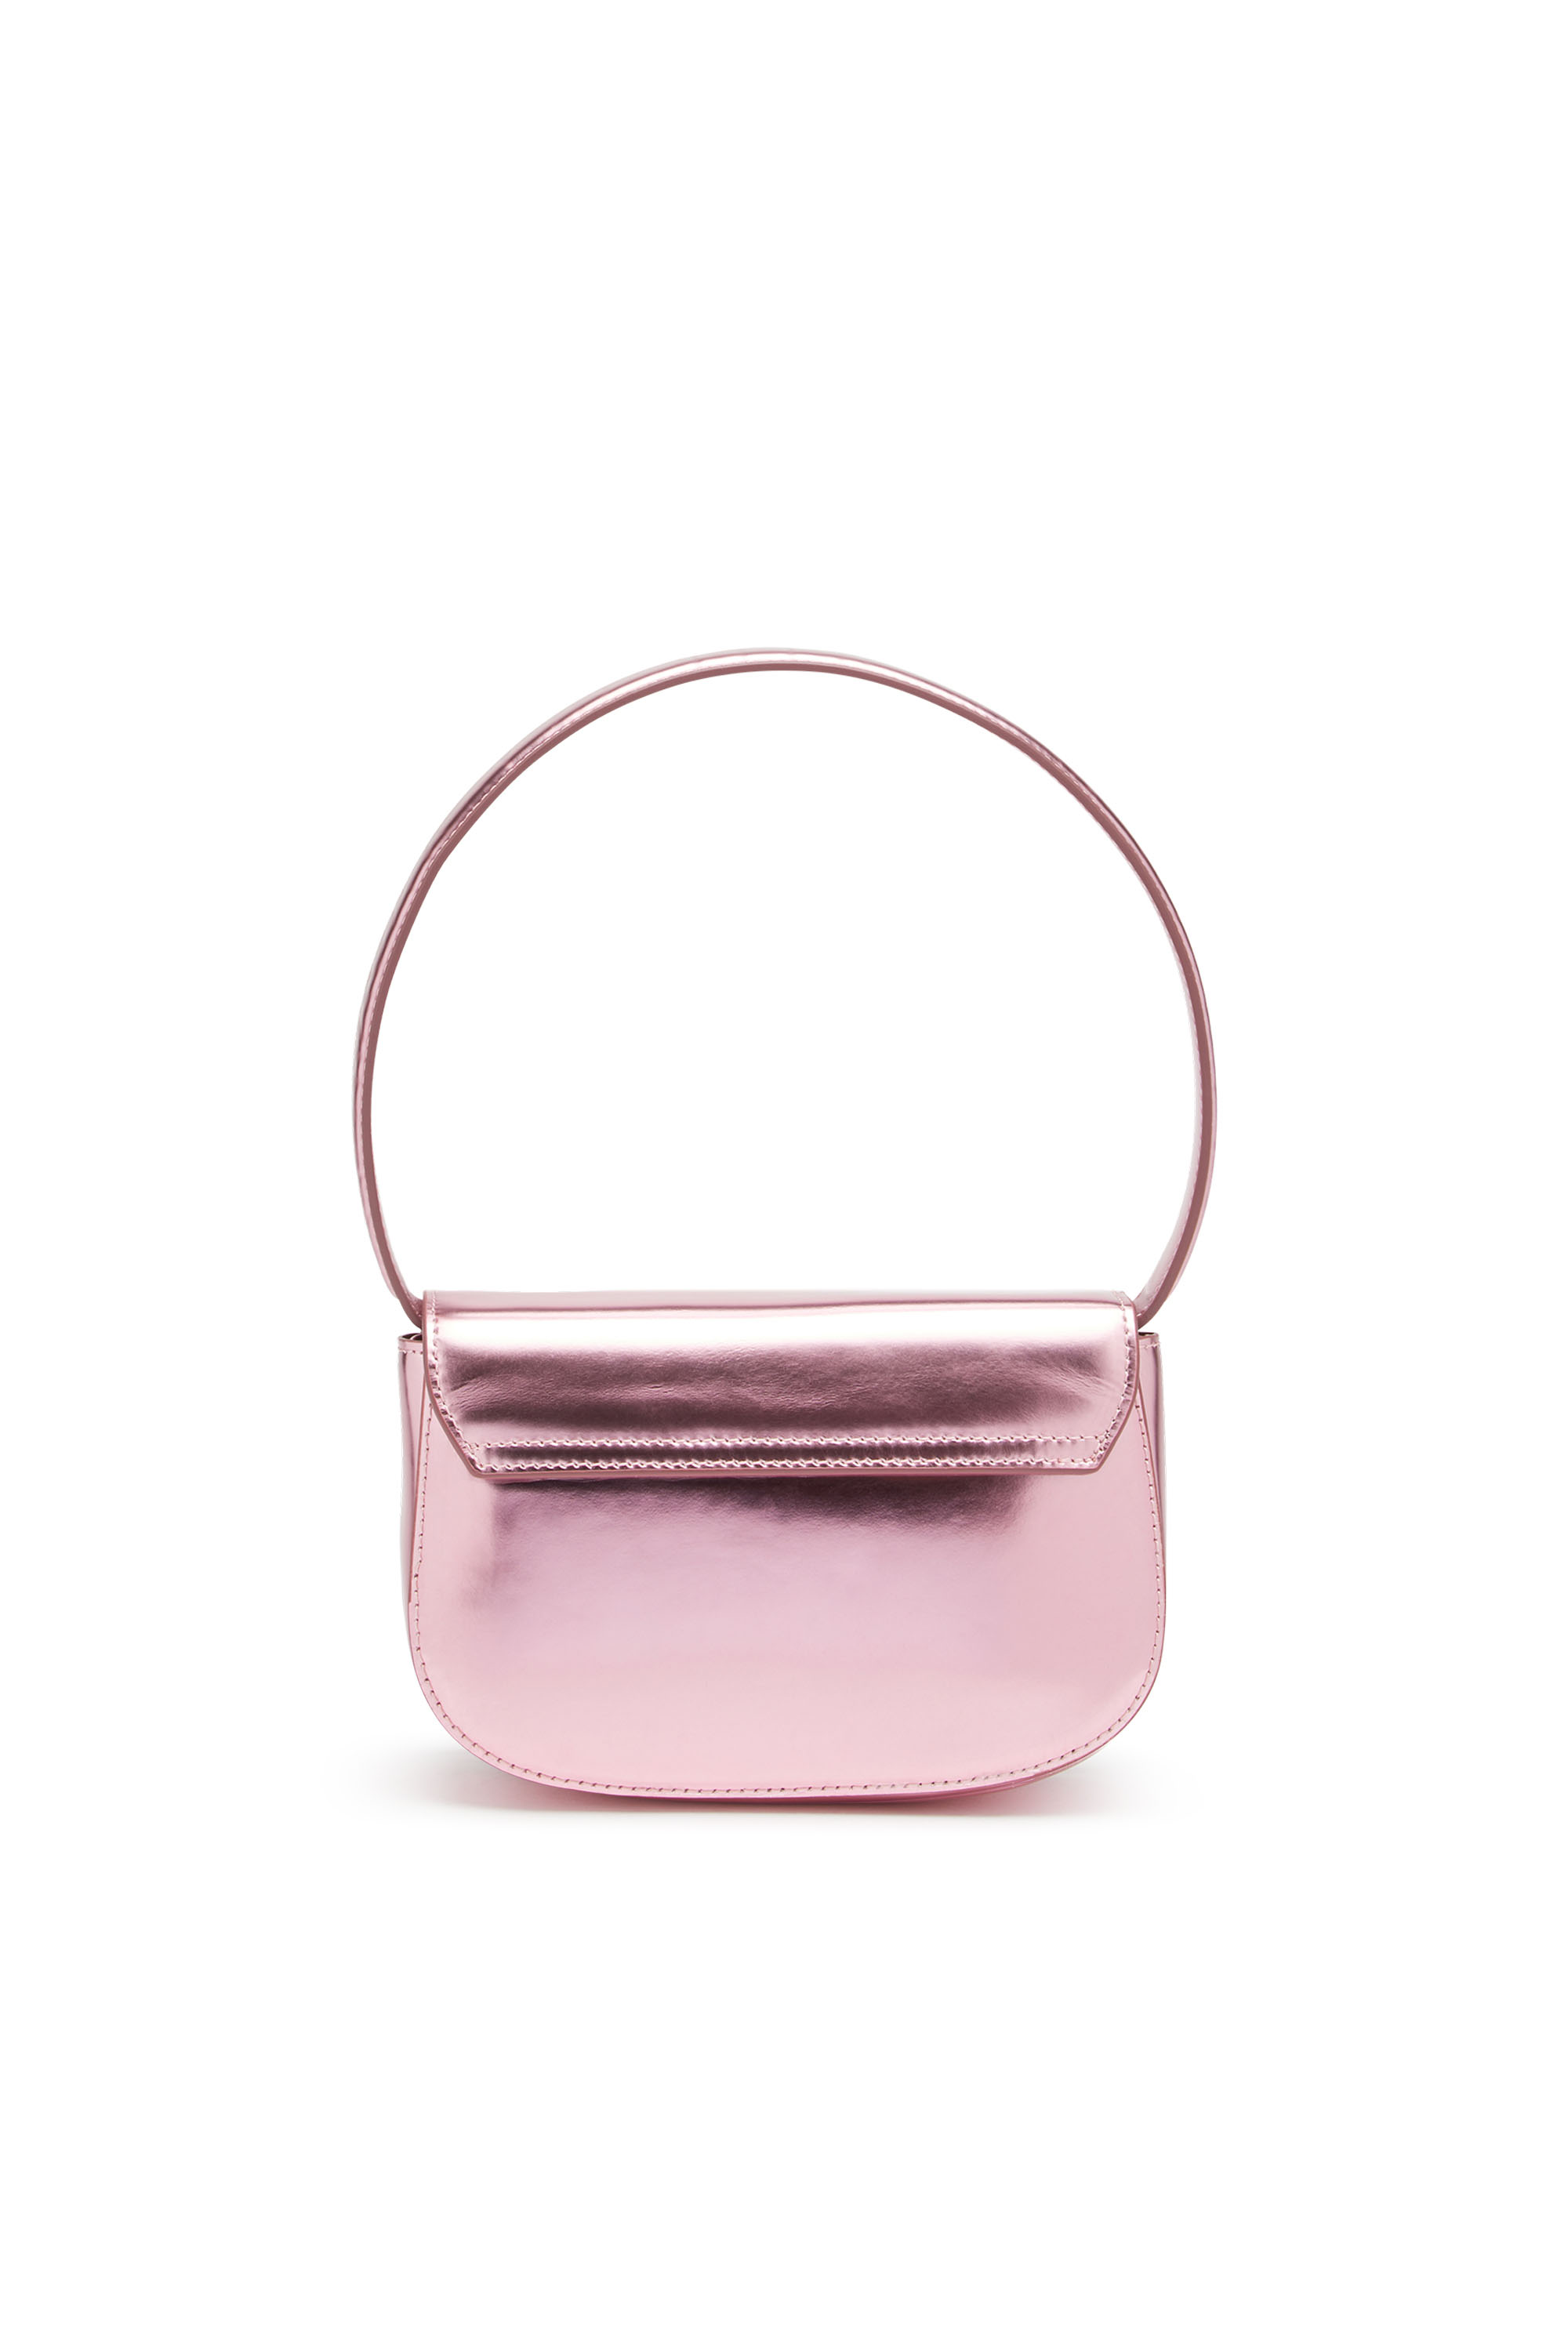 Diesel - 1DR, Woman 1DR-Iconic shoulder bag in mirrored leather in Pink - Image 2